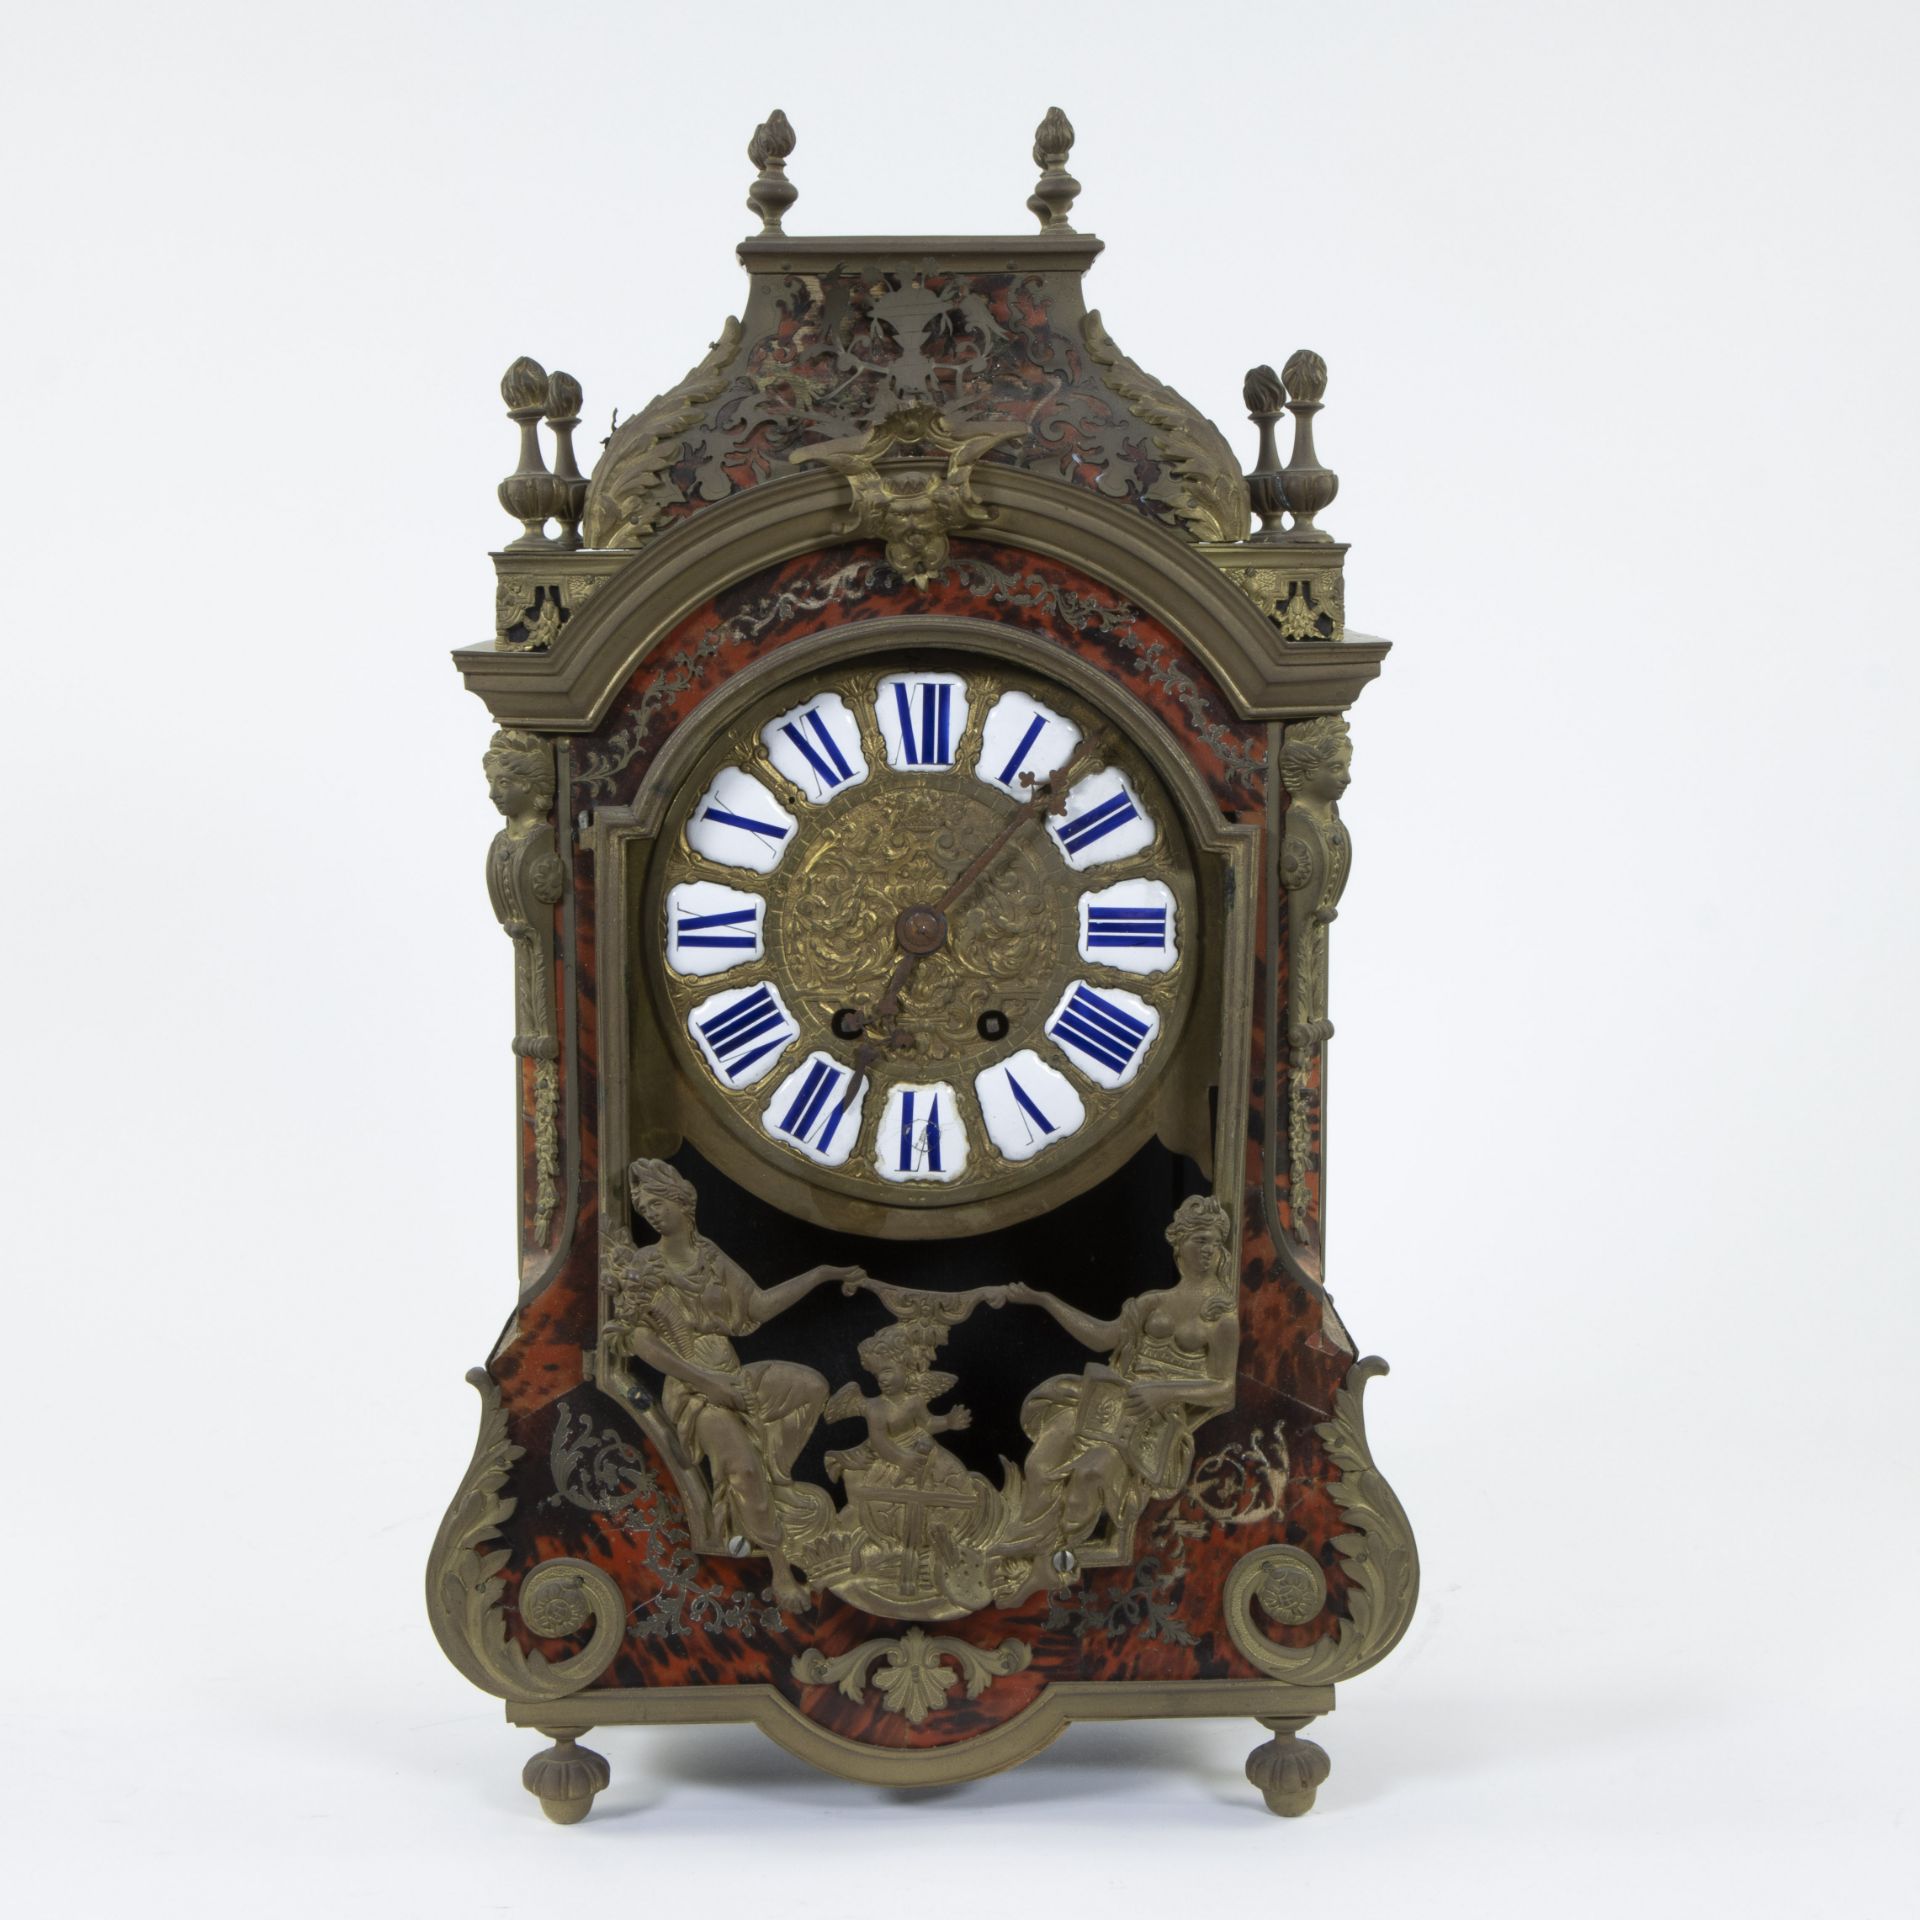 French 19th-century boulle clock after Balthazar Martinot with finely chiselled gilt dial with white